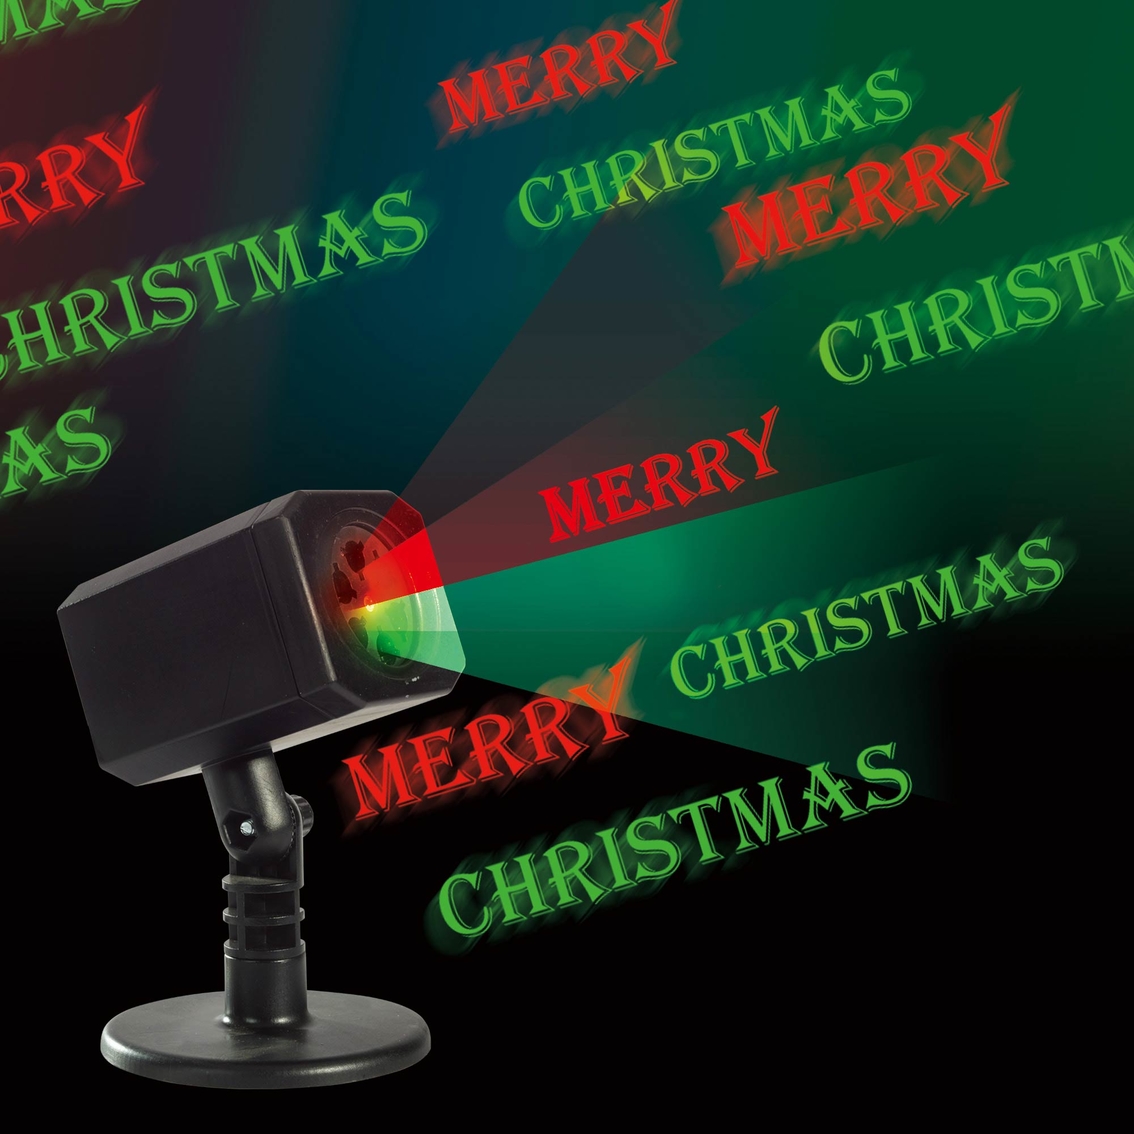 Everstar Animated Merry Christmas Led Projector With Timer | Lights